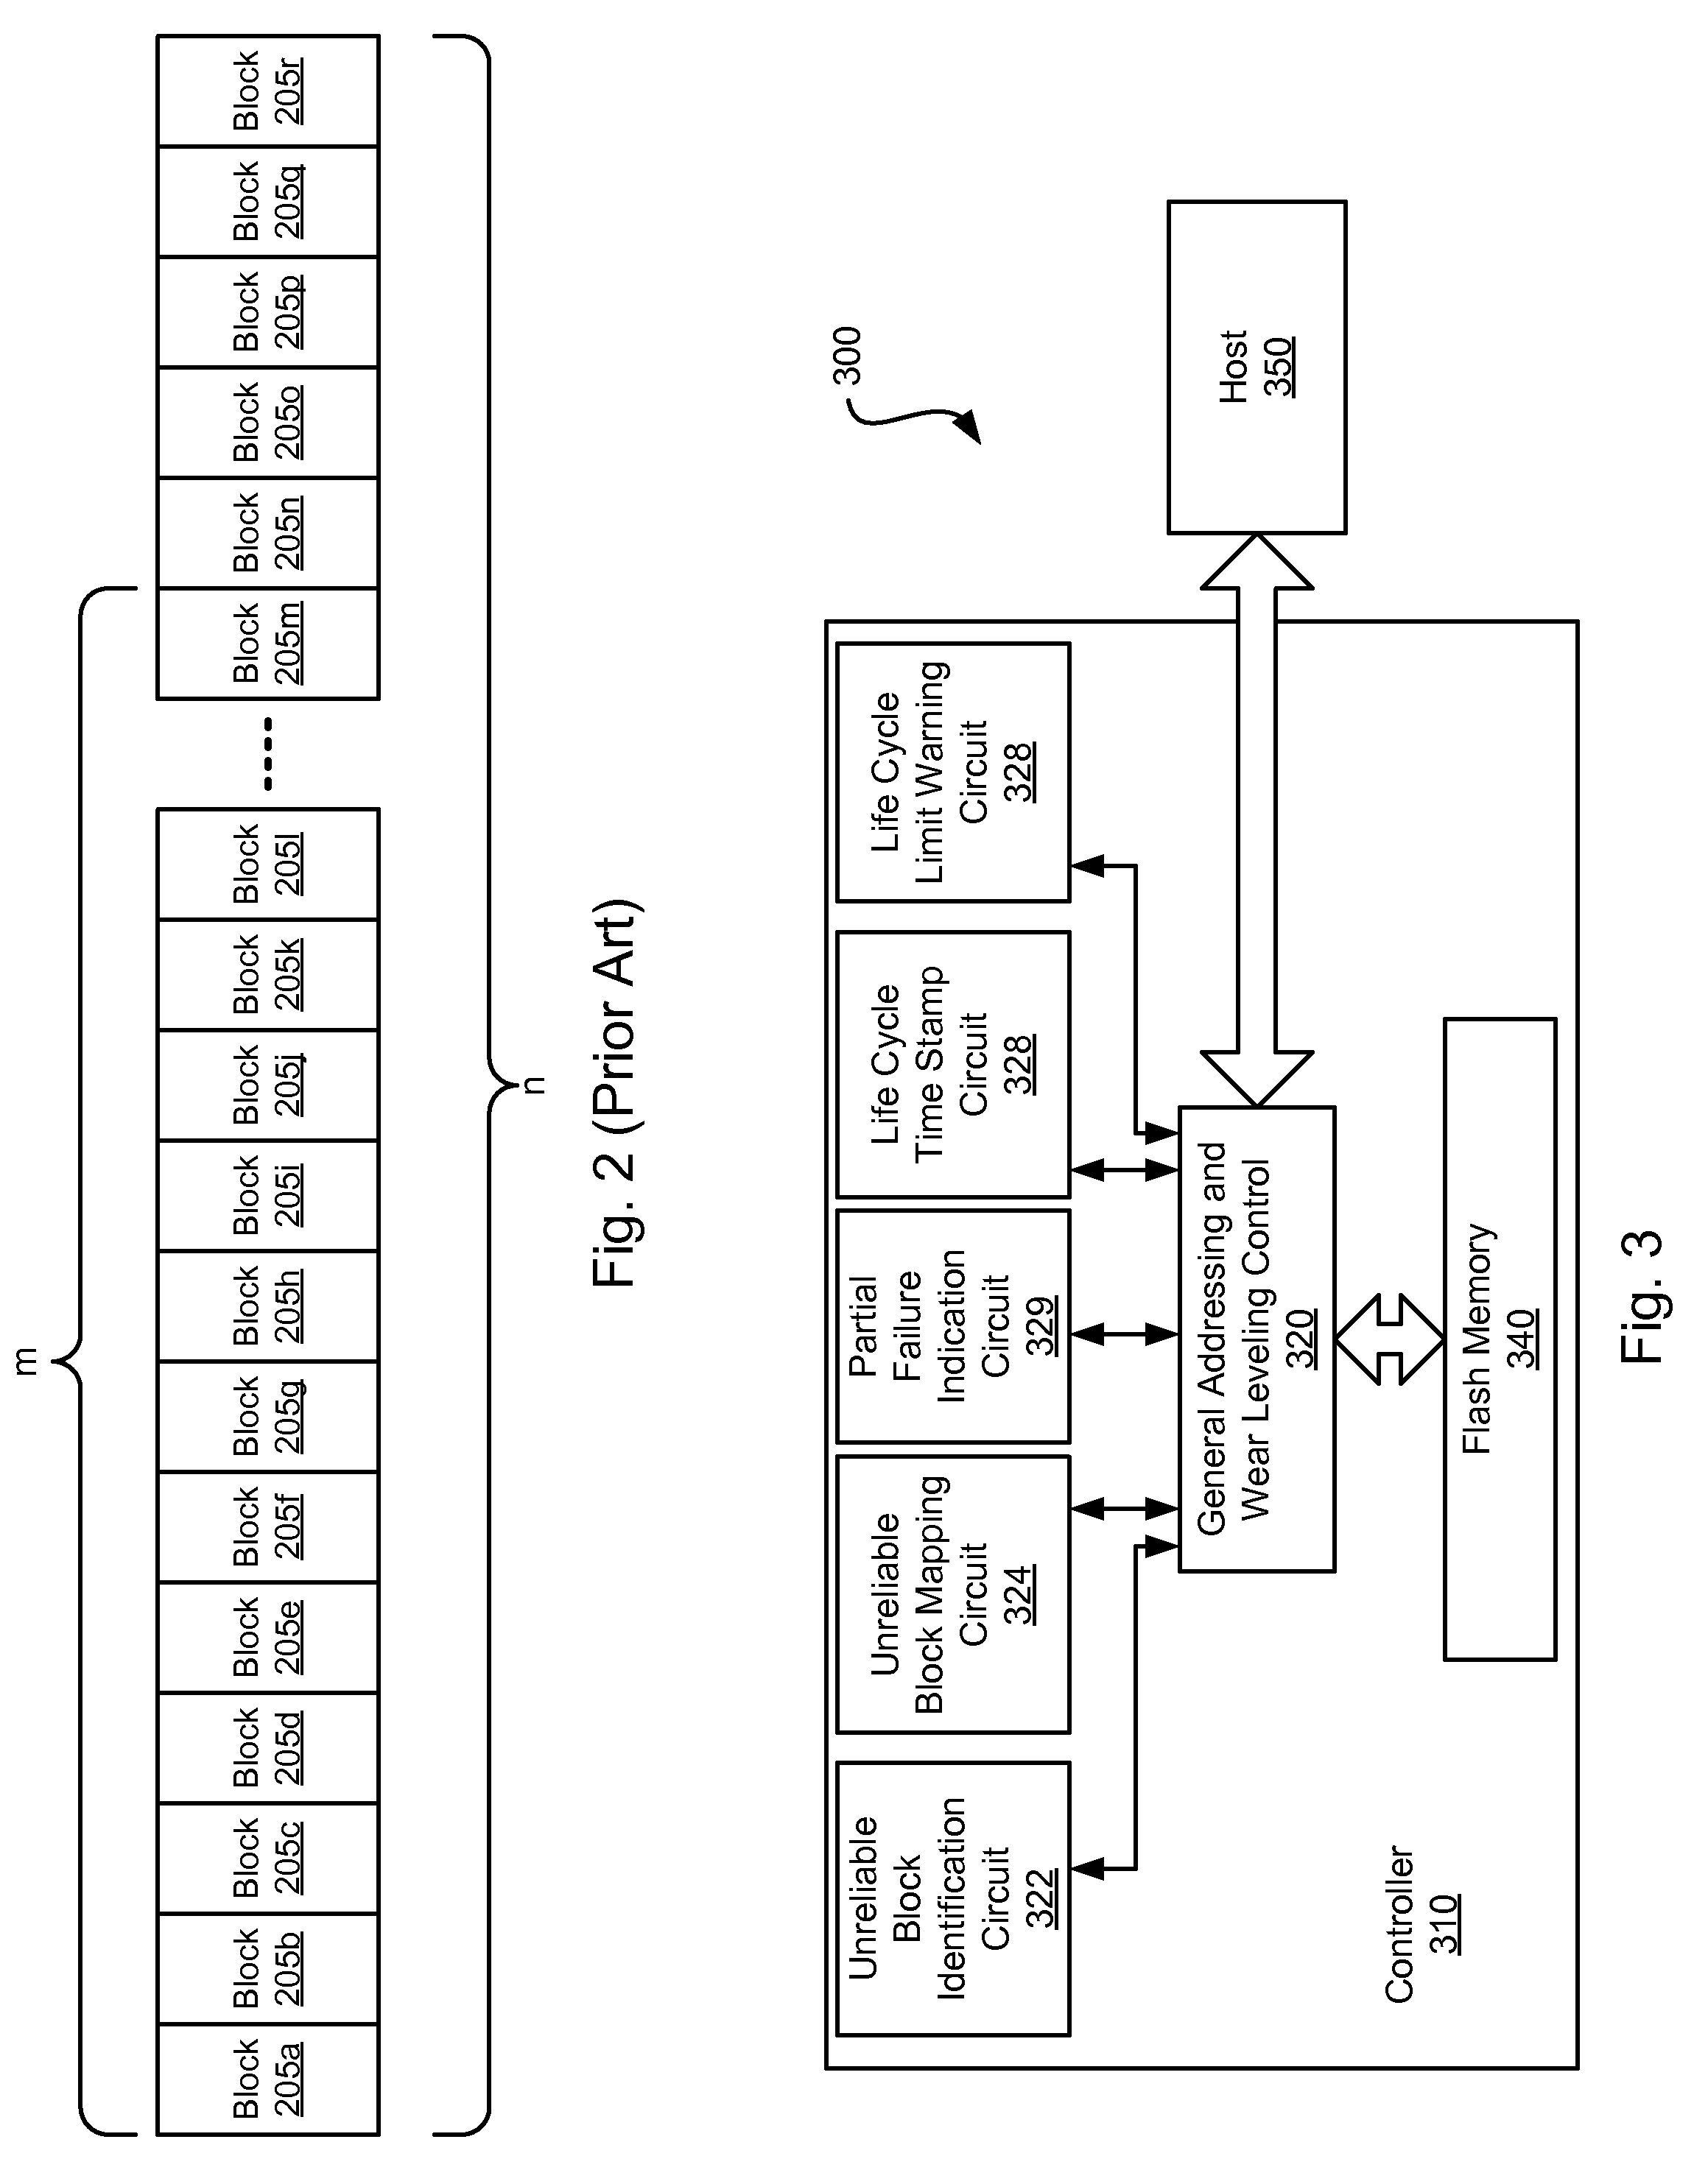 Systems and Methods for Governing the Life Cycle of a Solid State Drive